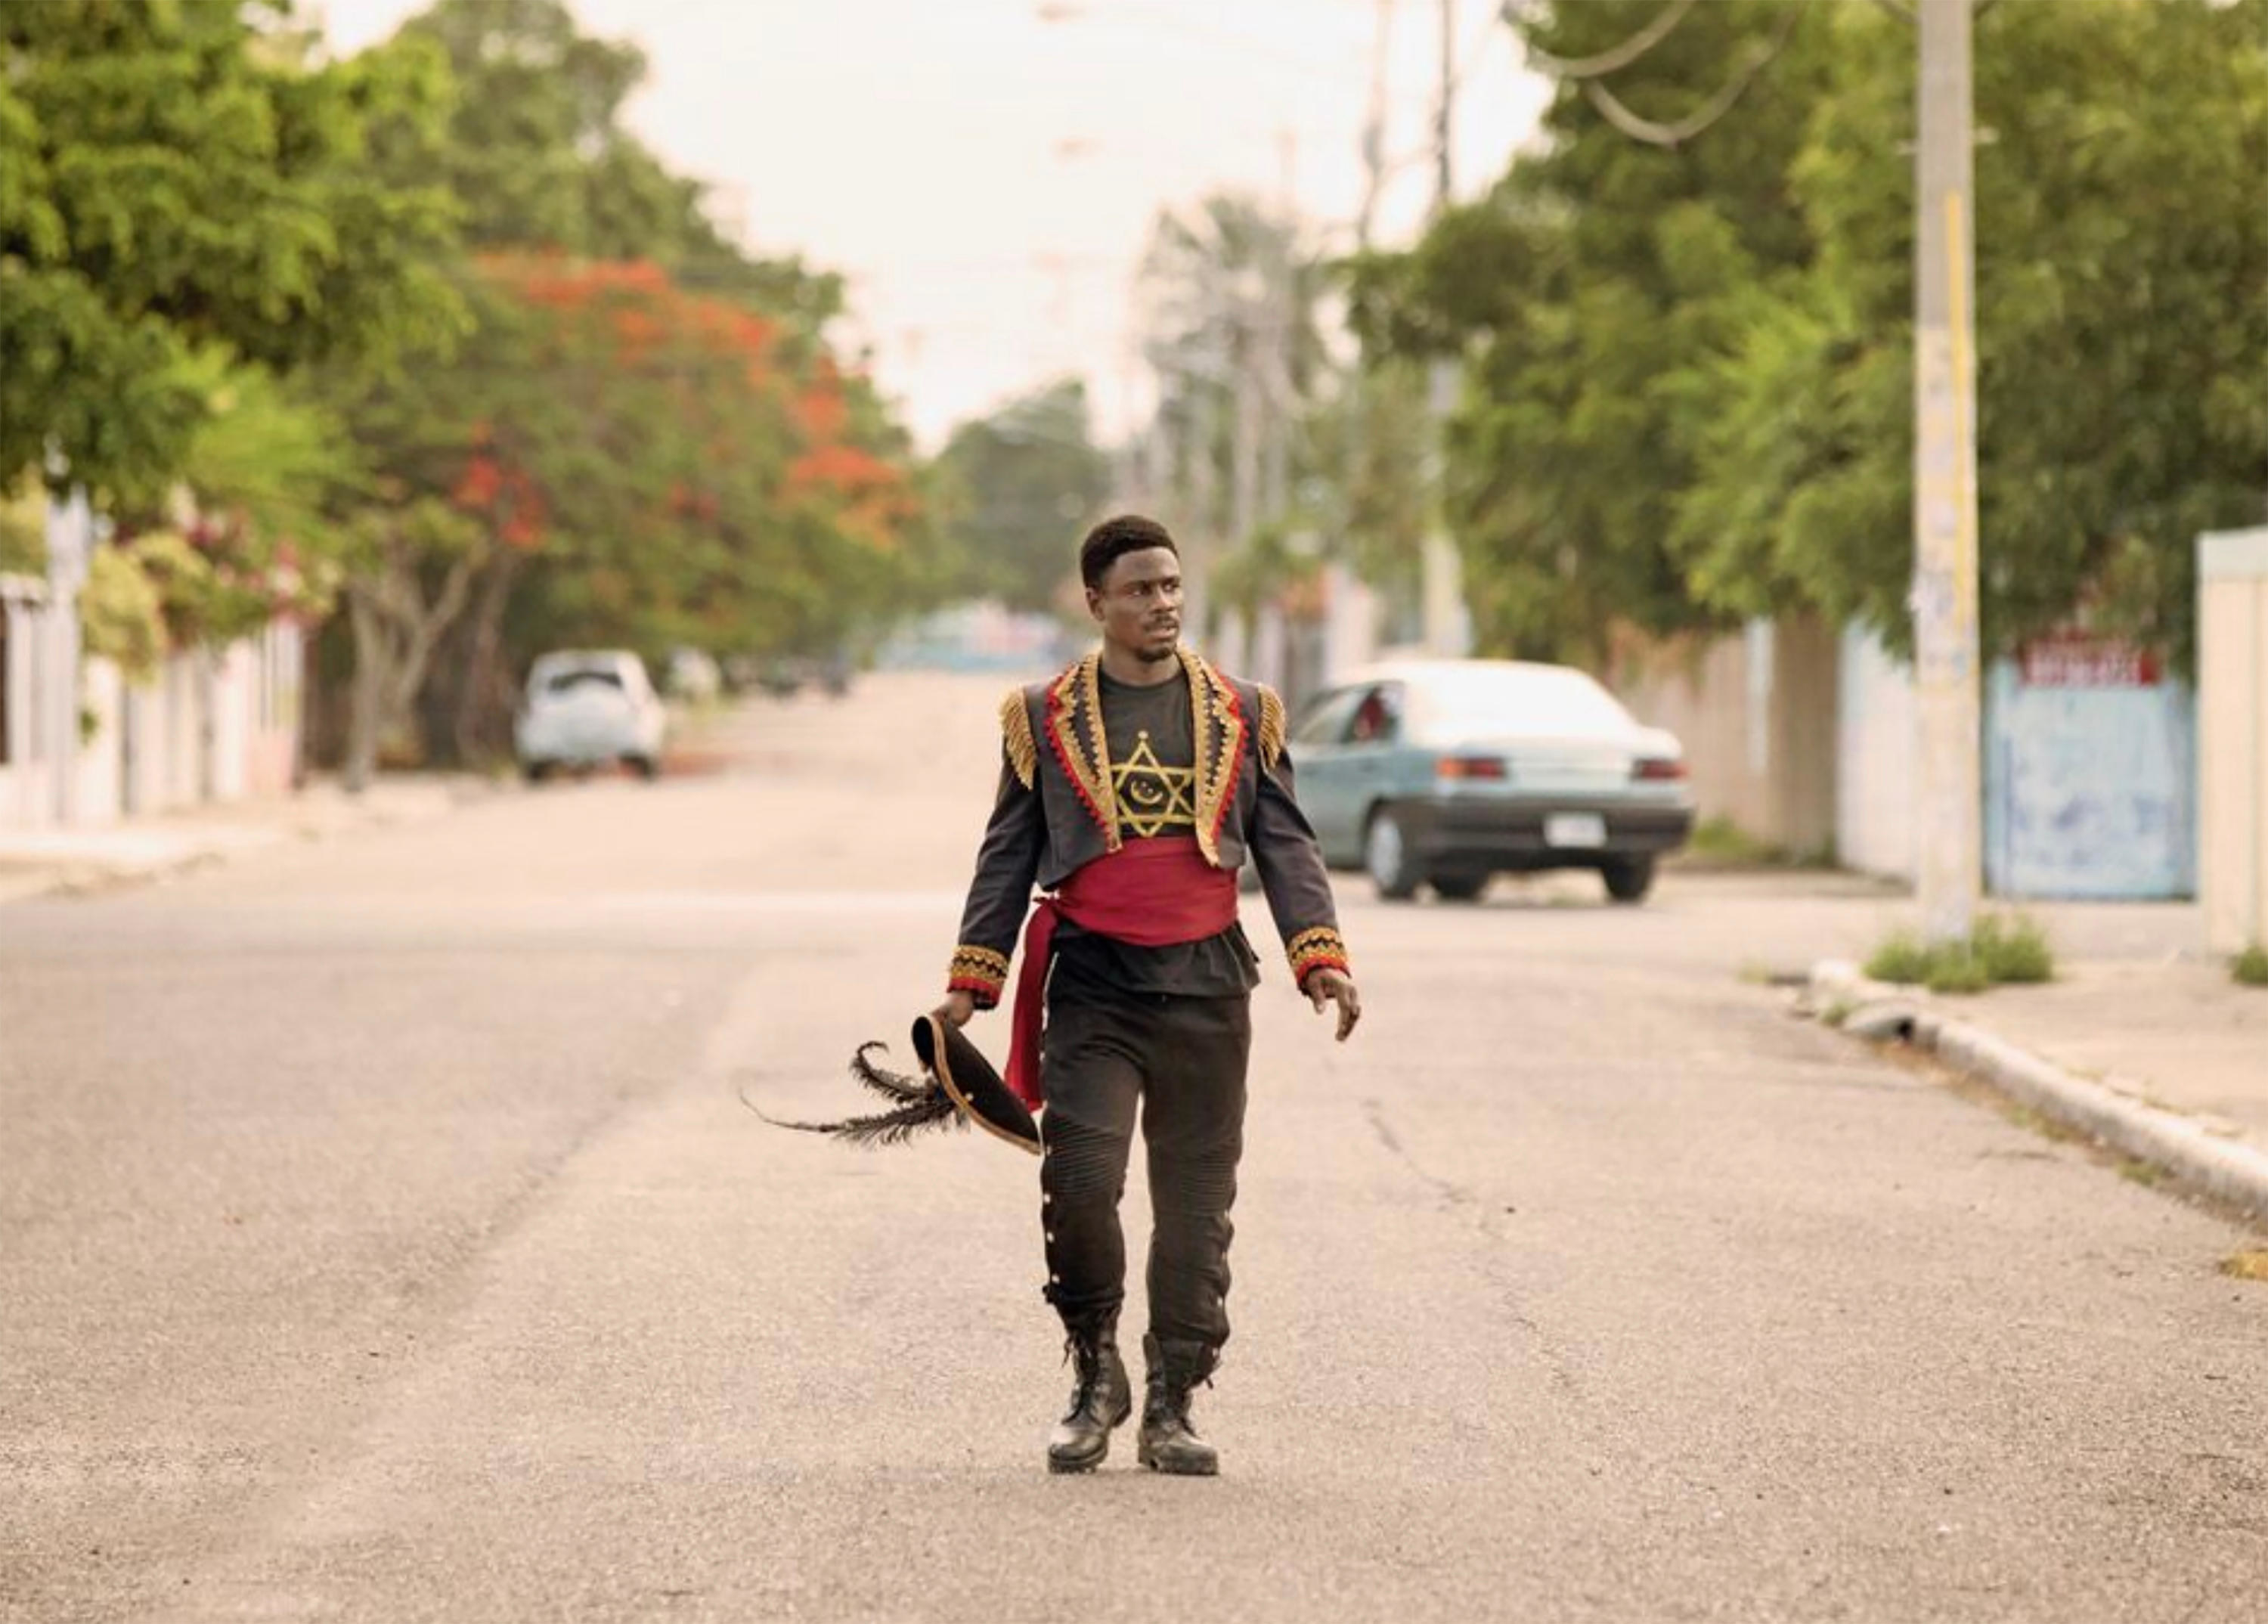 A Black man in ornate clothes walks down an empty street